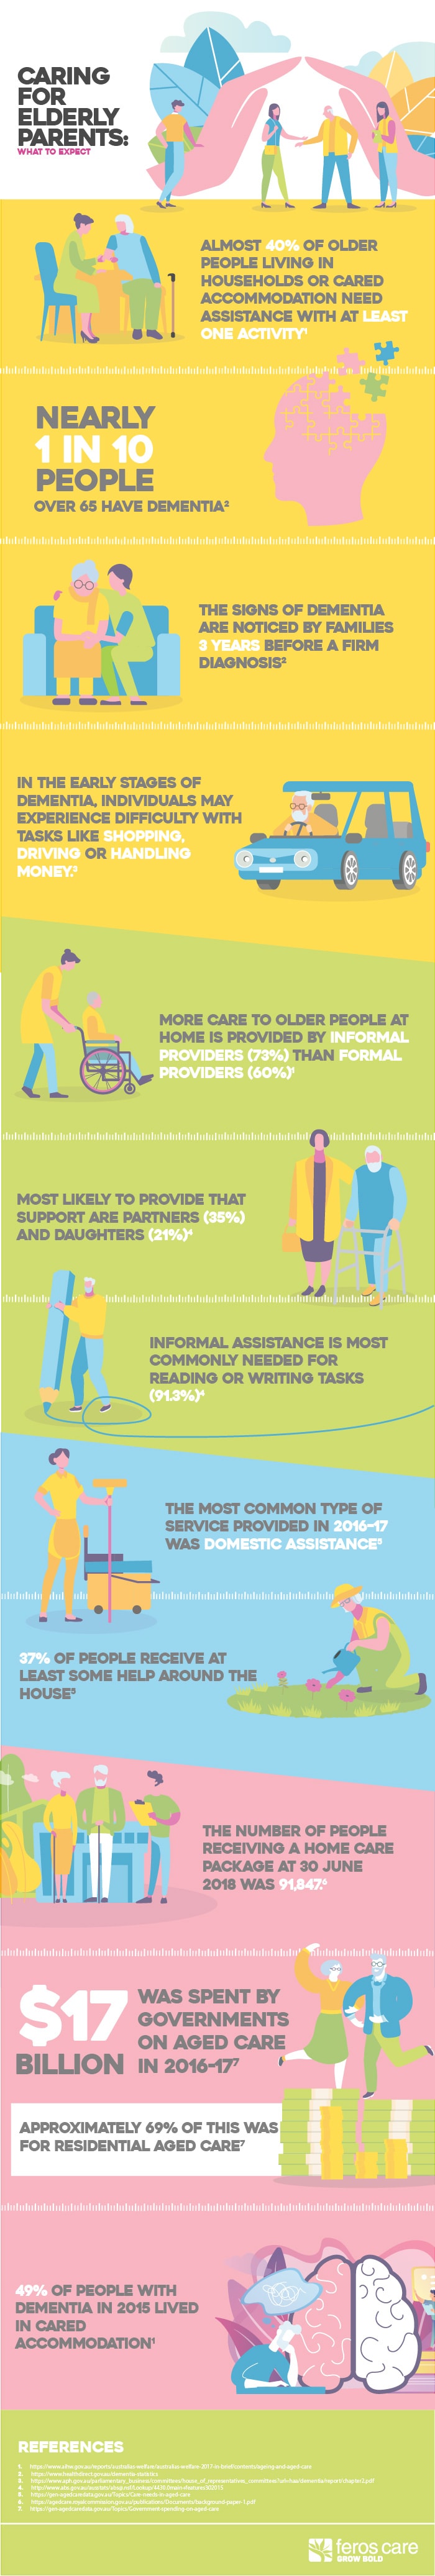 Caring for elderly parents: what to expect informative infographic 